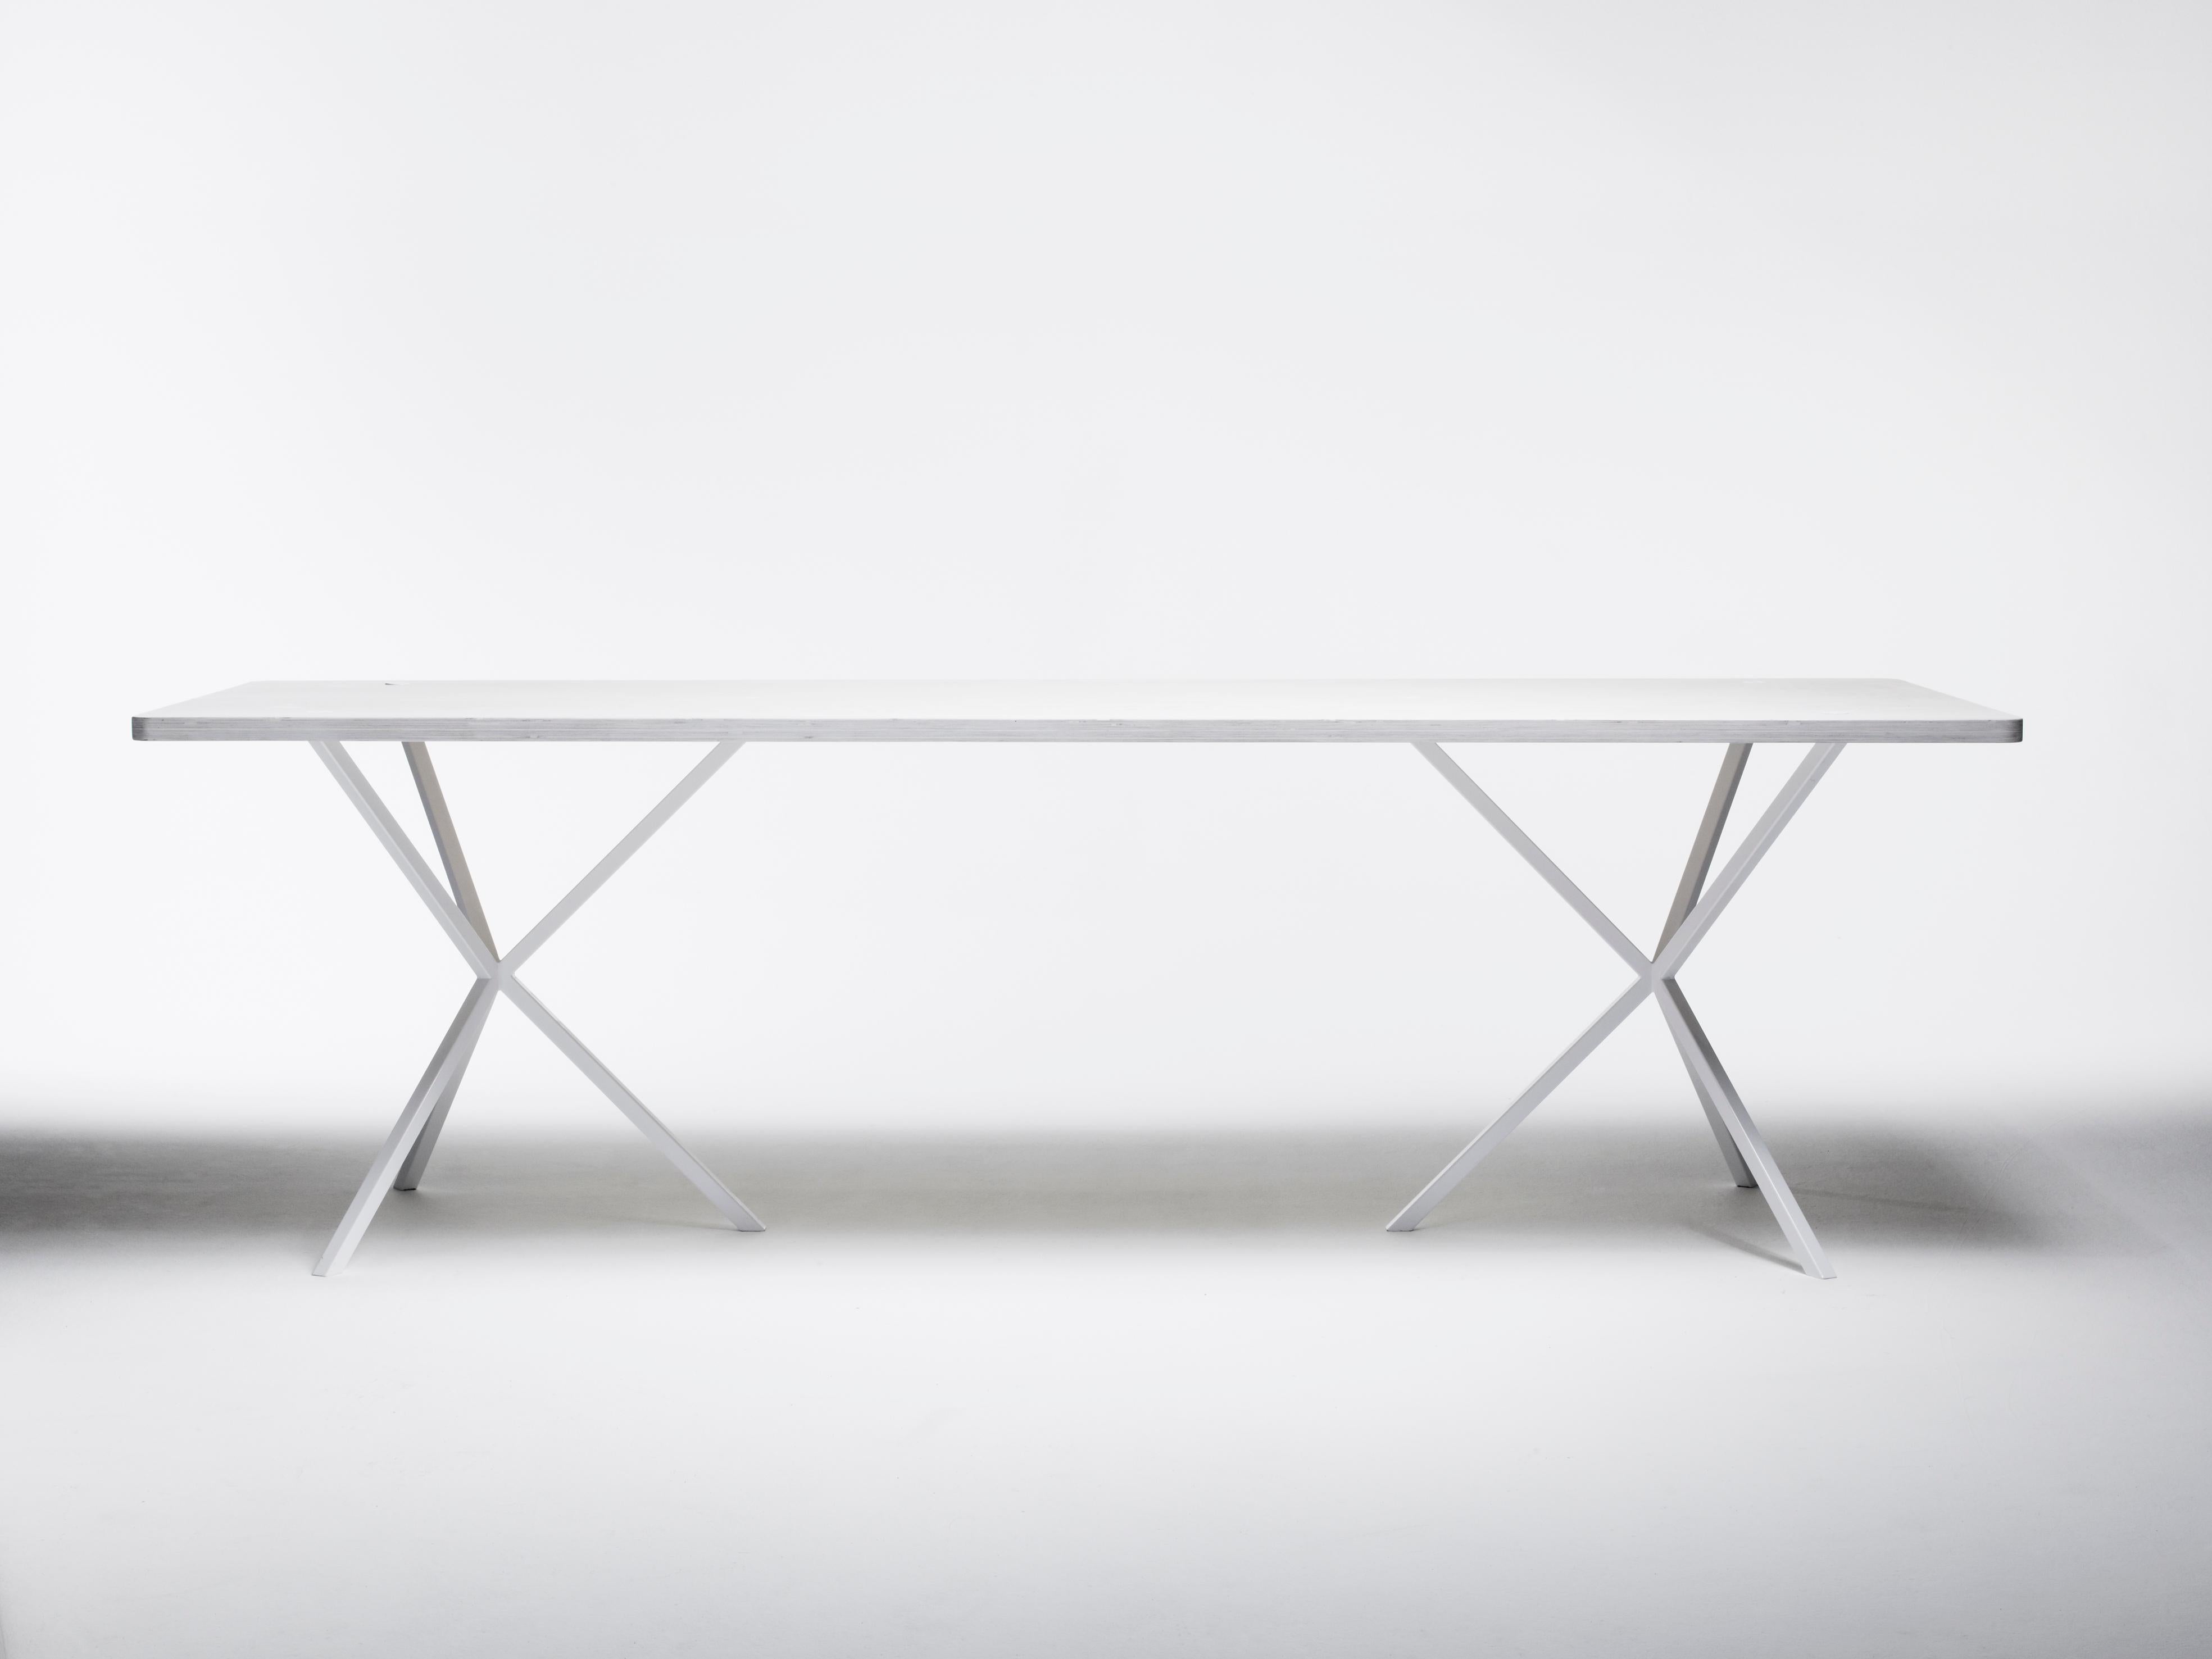 The contemporary Neb rectangular table has a wide range of applications; dining table at home, a work table at the office or a large conference table. 

The table comes in a number of variations, sizes, colors and materials to be able to fit its